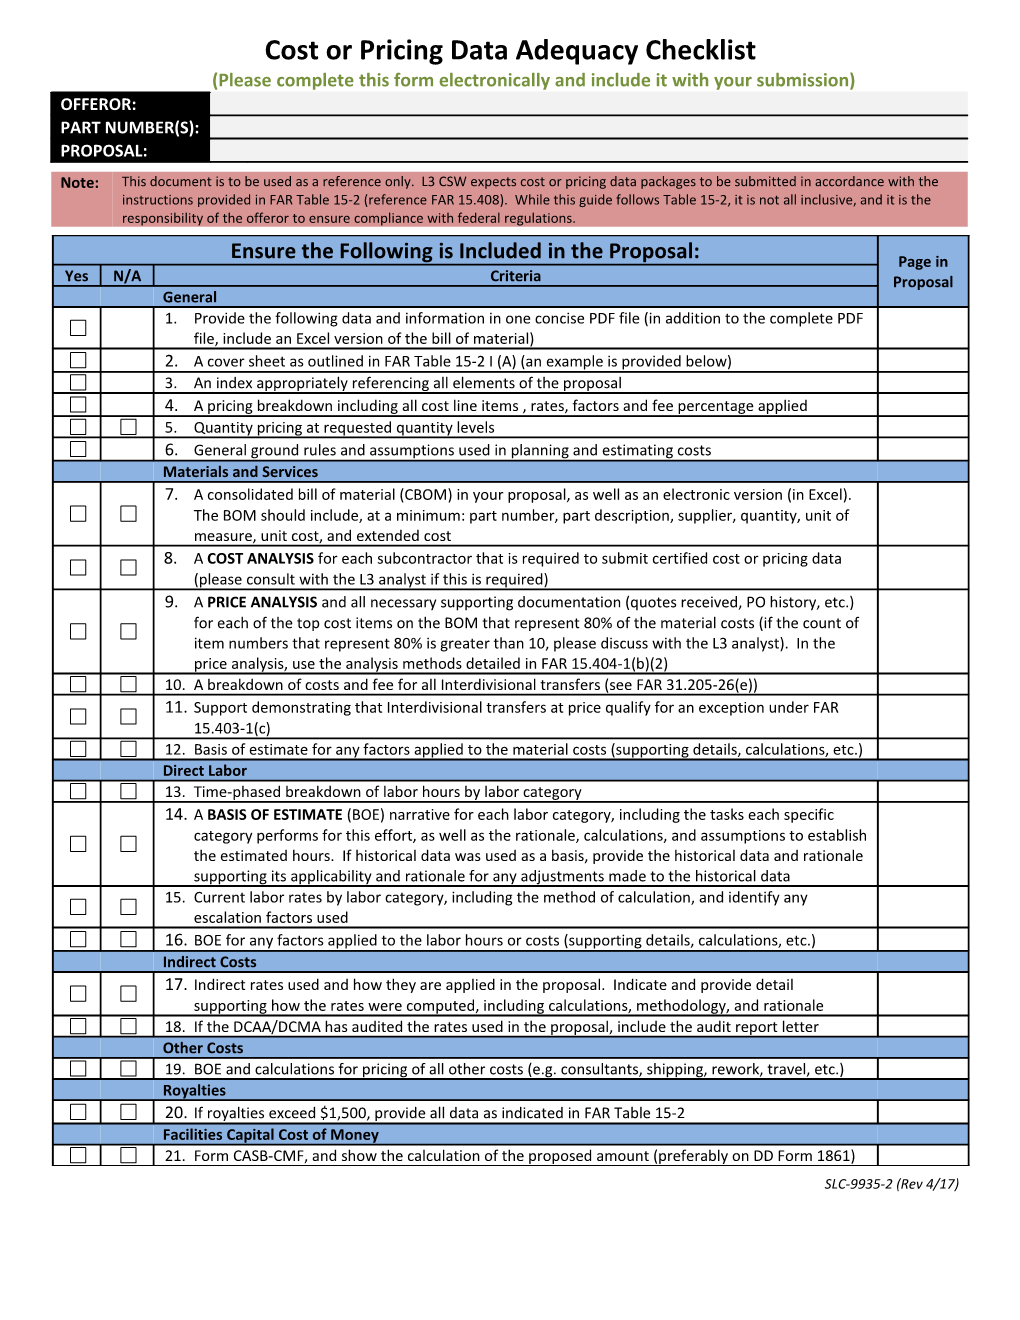 Elements of a Cost Or Pricing Data Package Checklist (Continued)